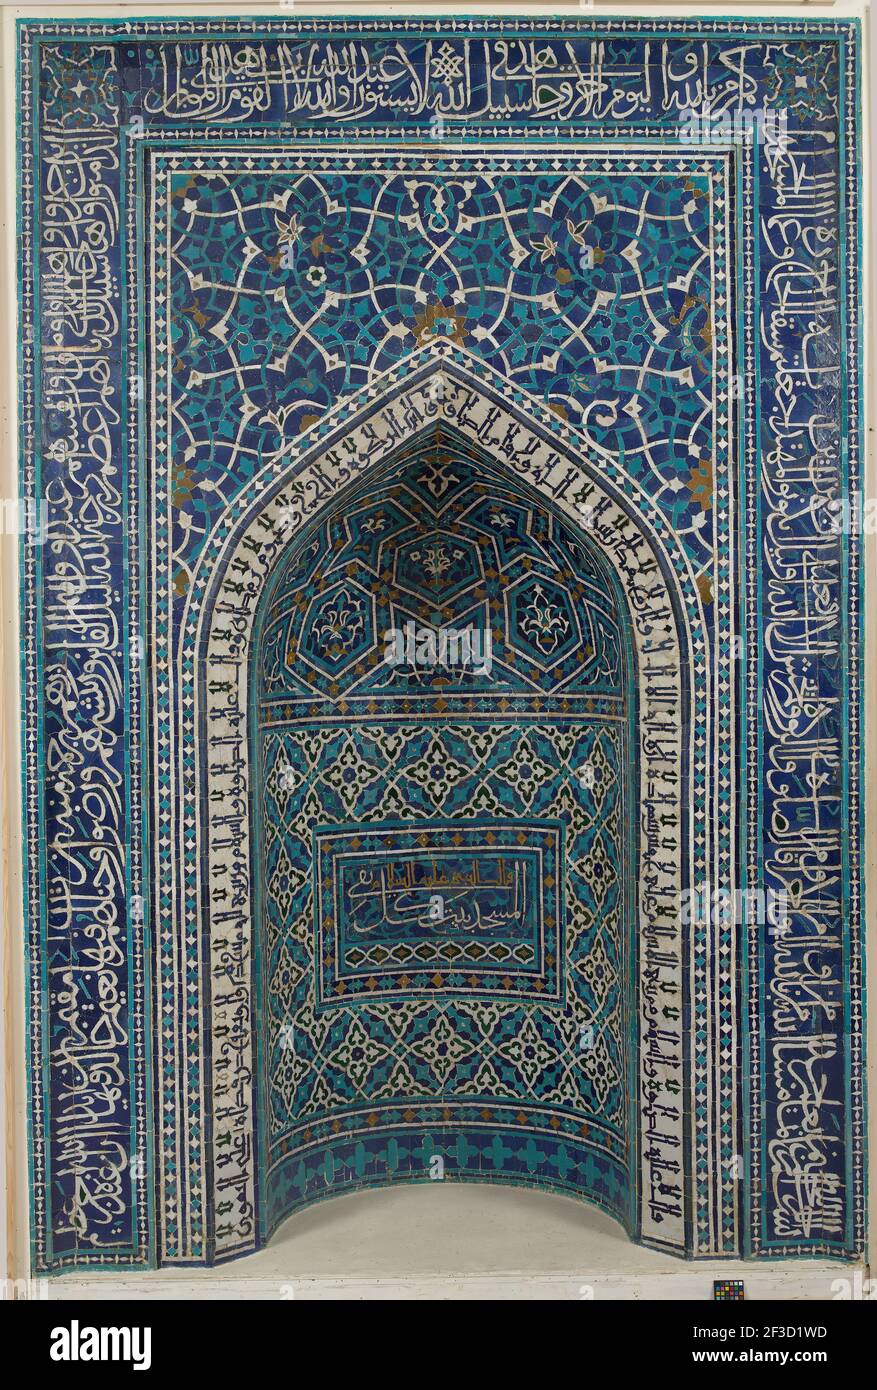 Mihrab (Prayer Niche), Iran, dated A.H. 755/ A.D. 1354-55. Mosaic tilework with Arabic Inscription in thuluth script from the Qur'an 9:1-22 Stock Photo